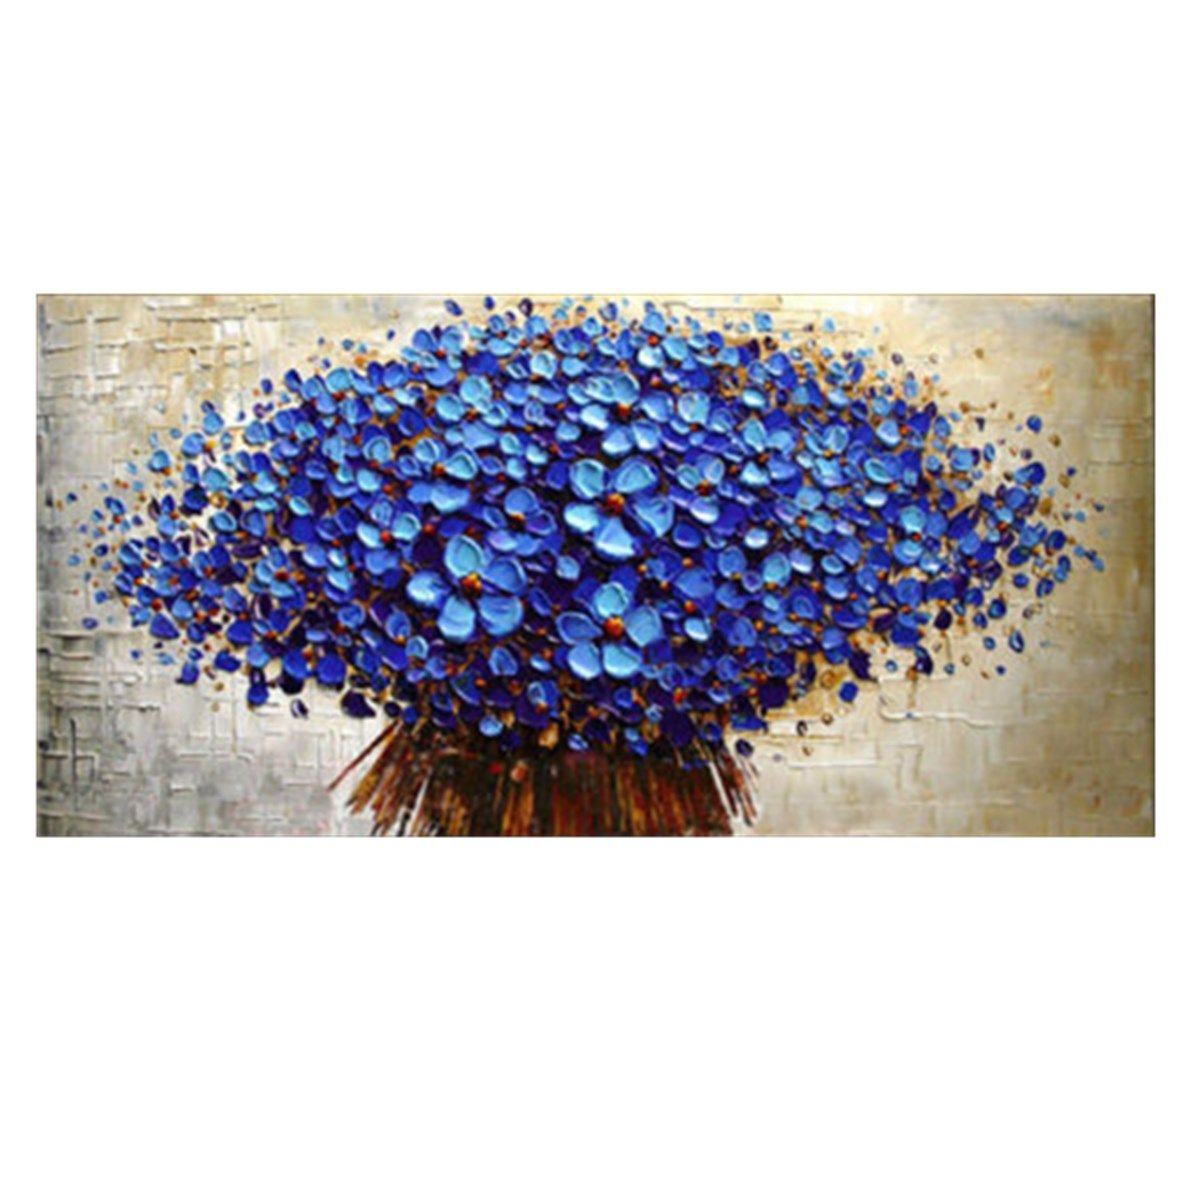 Blue-Unframed-Tree-Canvas-Art-Oil-Paintings-Modern-Abstract-Wall-Home-Decor-1142508